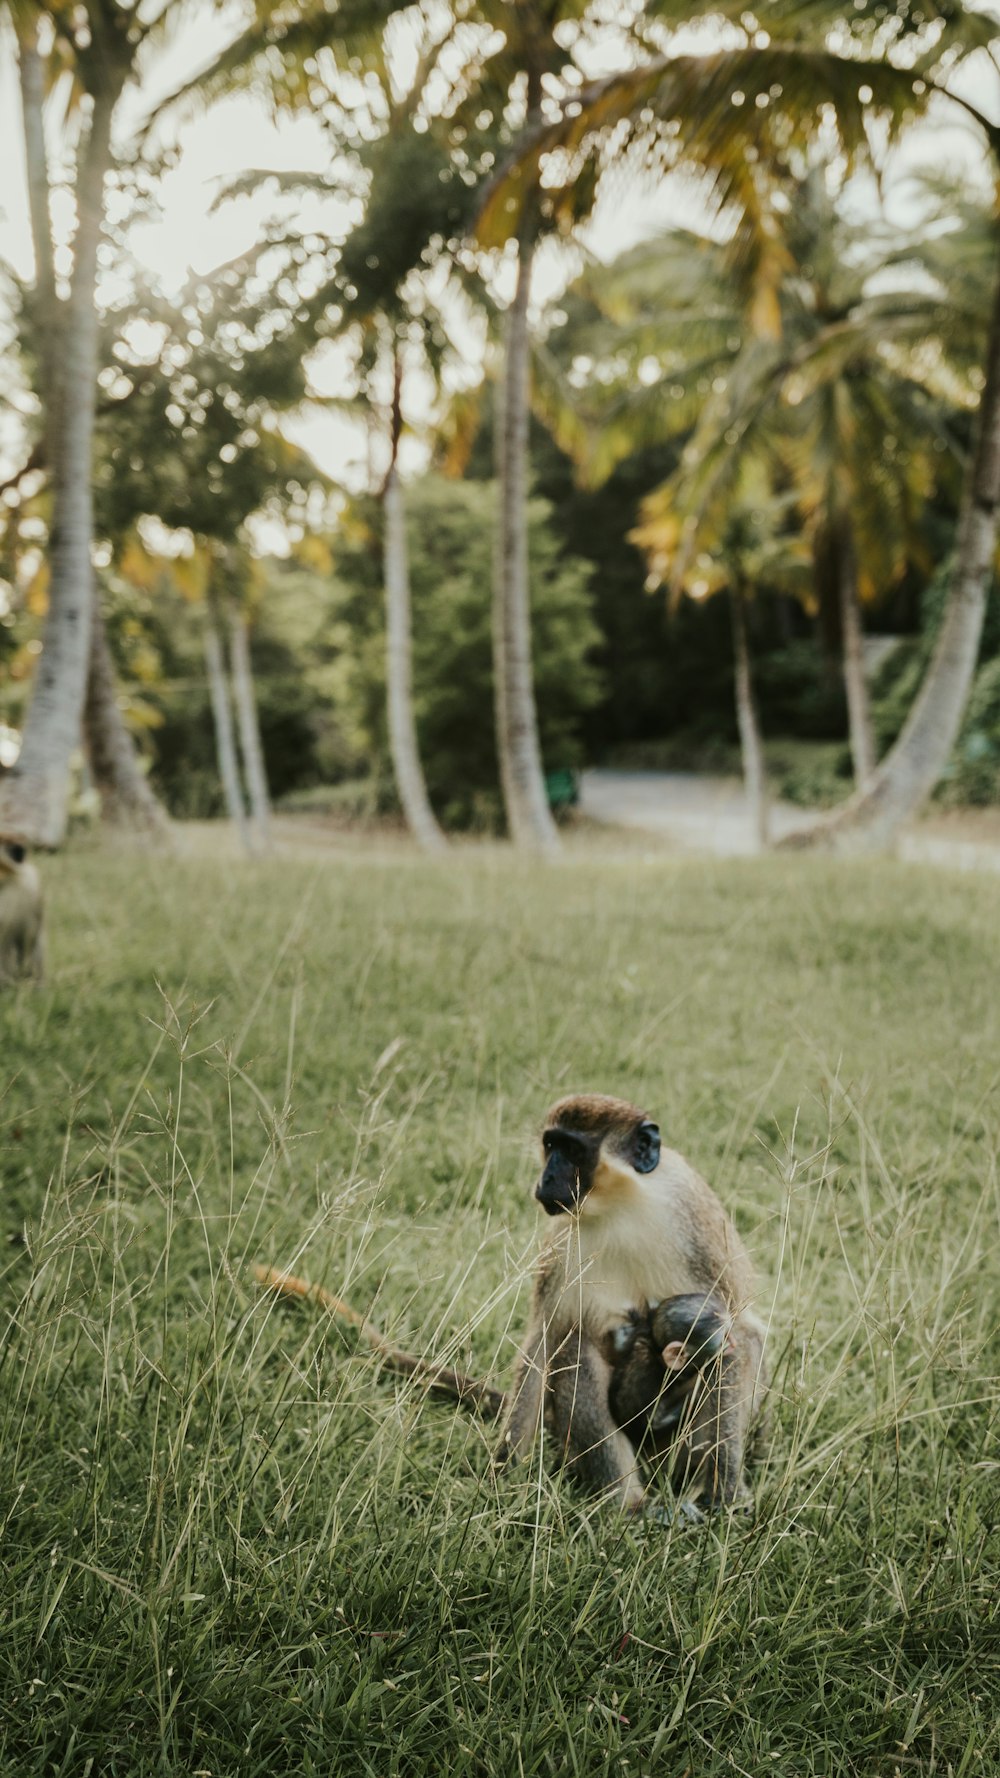 a monkey sitting in the middle of a grassy field